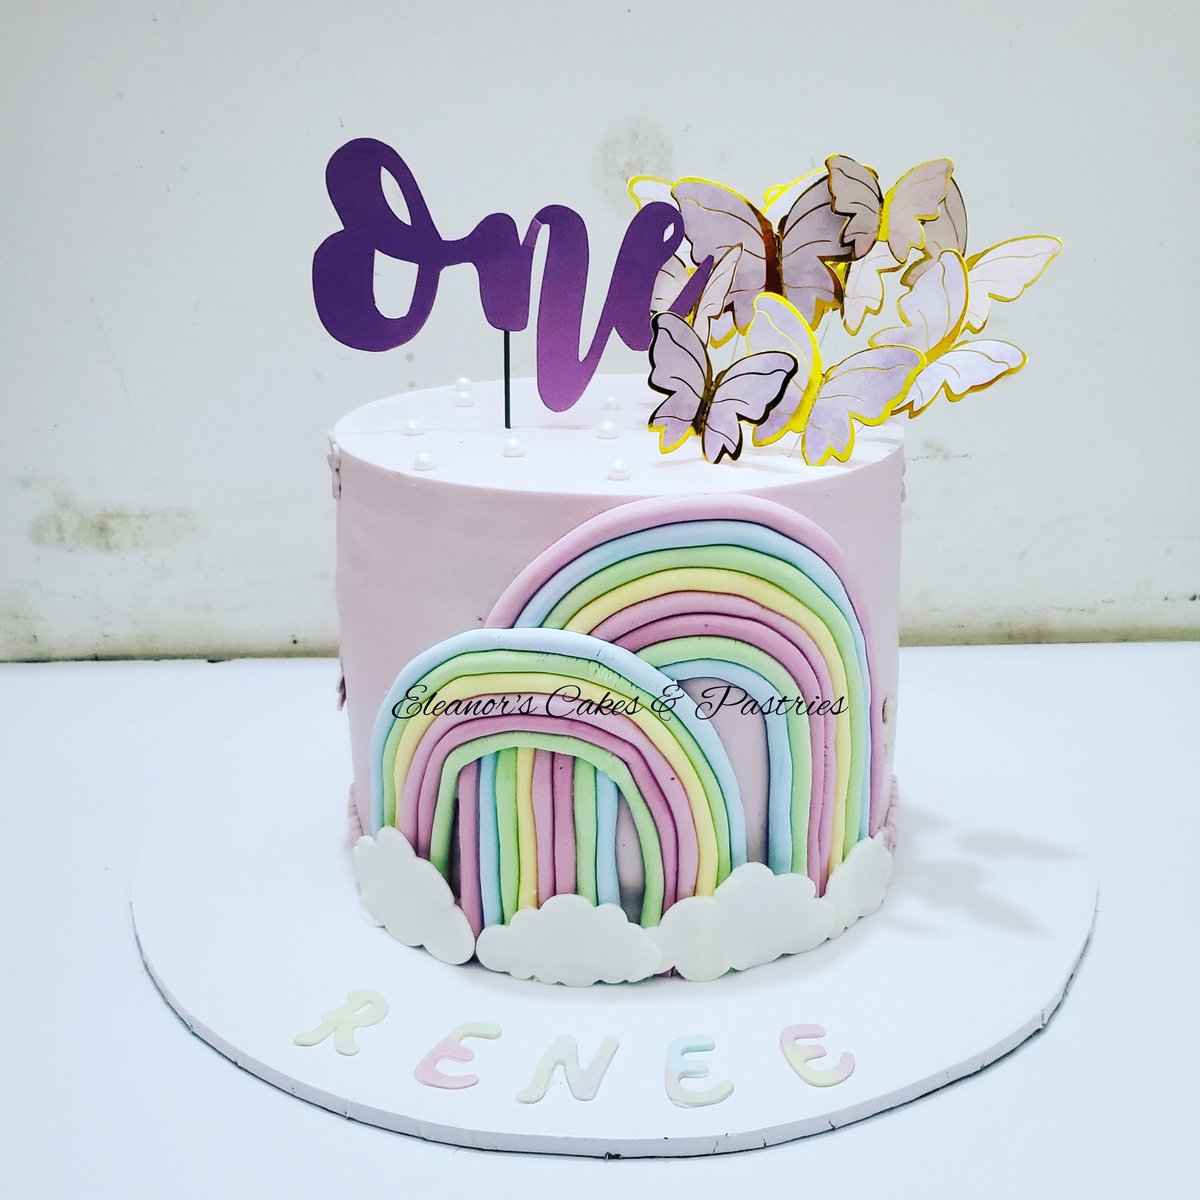 For Renee
Less is more
Beautiful is the word.
Tastes even better.
Our bakery is at your service. 
Contact us on 679148609
#eleanorscakesandpastries #cakes #cakesforkids